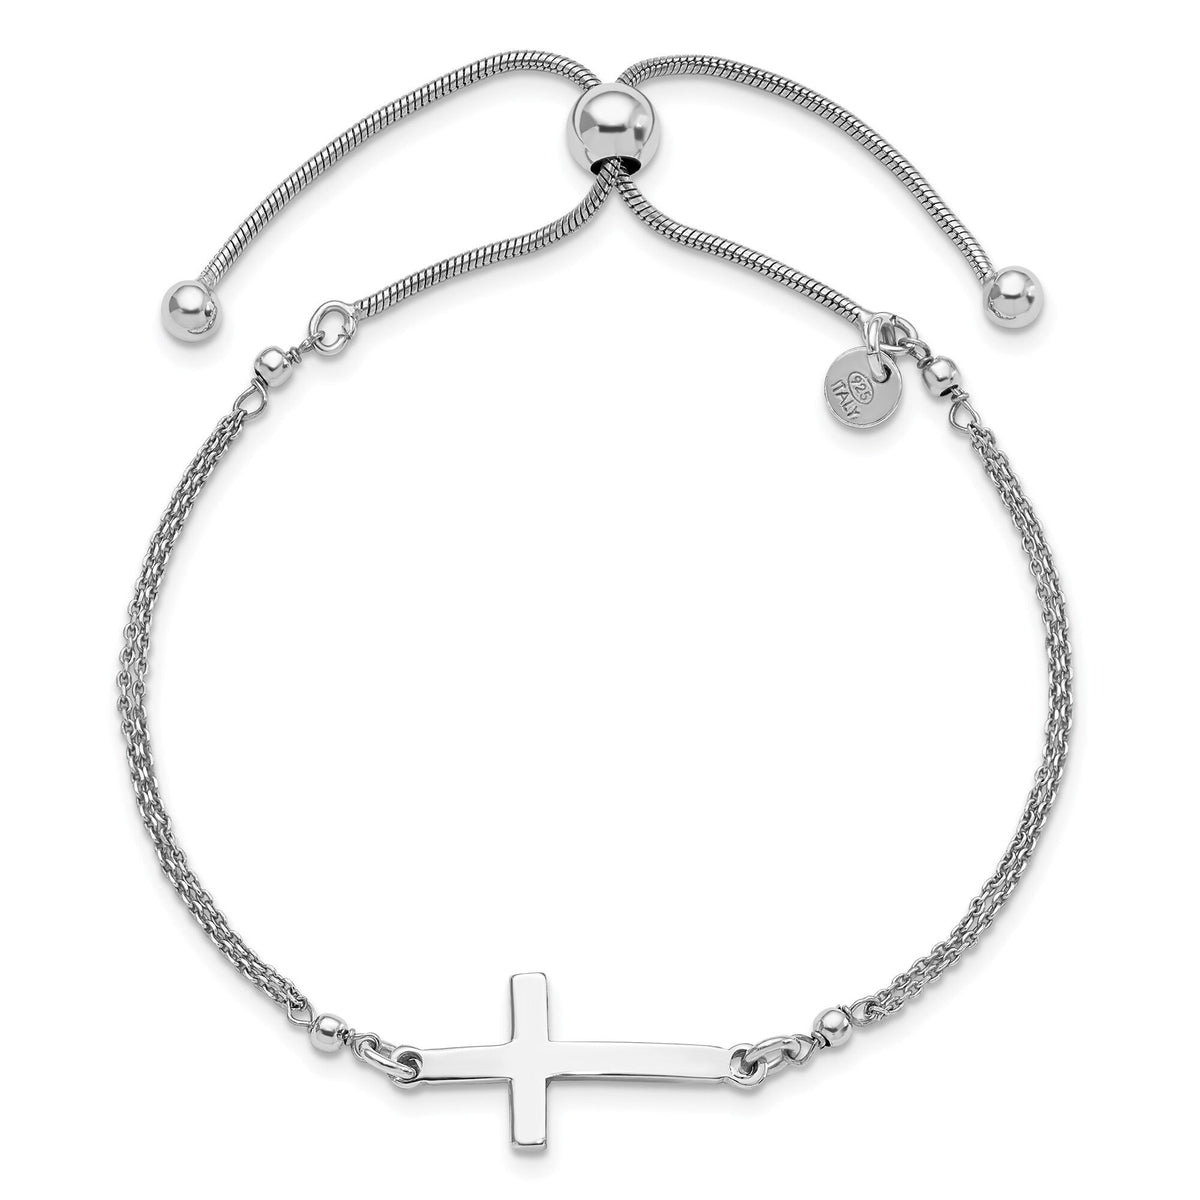 Sterling Silver Polished Cross Miraculous Medal Adjustable Bracelet - Gift Box Included- Ships Next Business Day